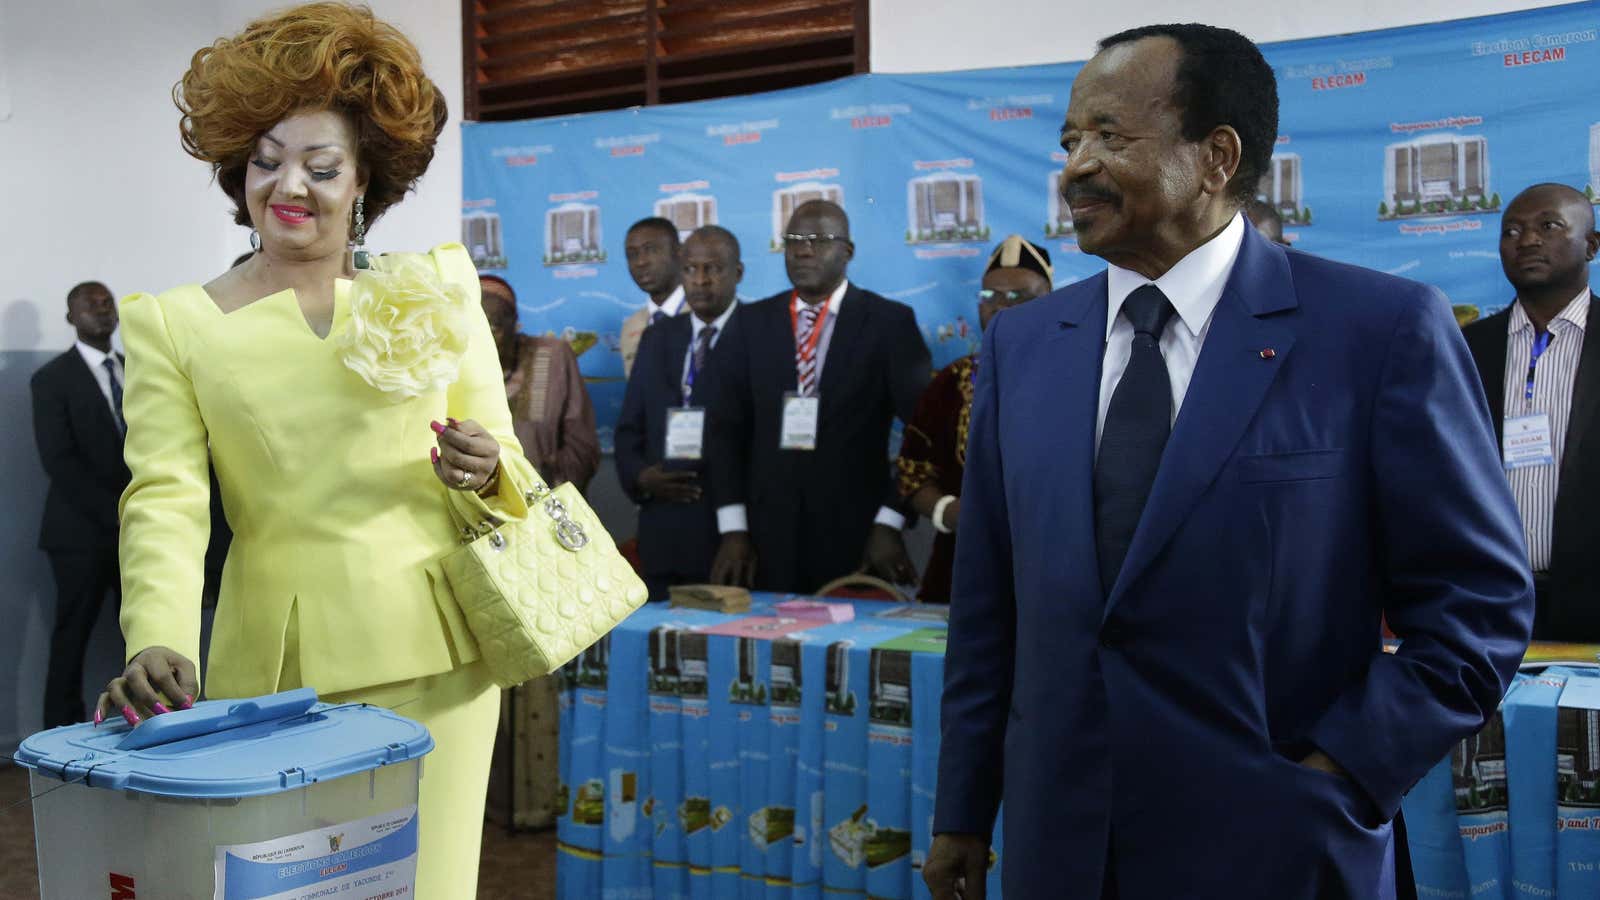 Cameroon’s president Paul Biya and wife Chantal voting in Yaounde, Cameroon, last October.